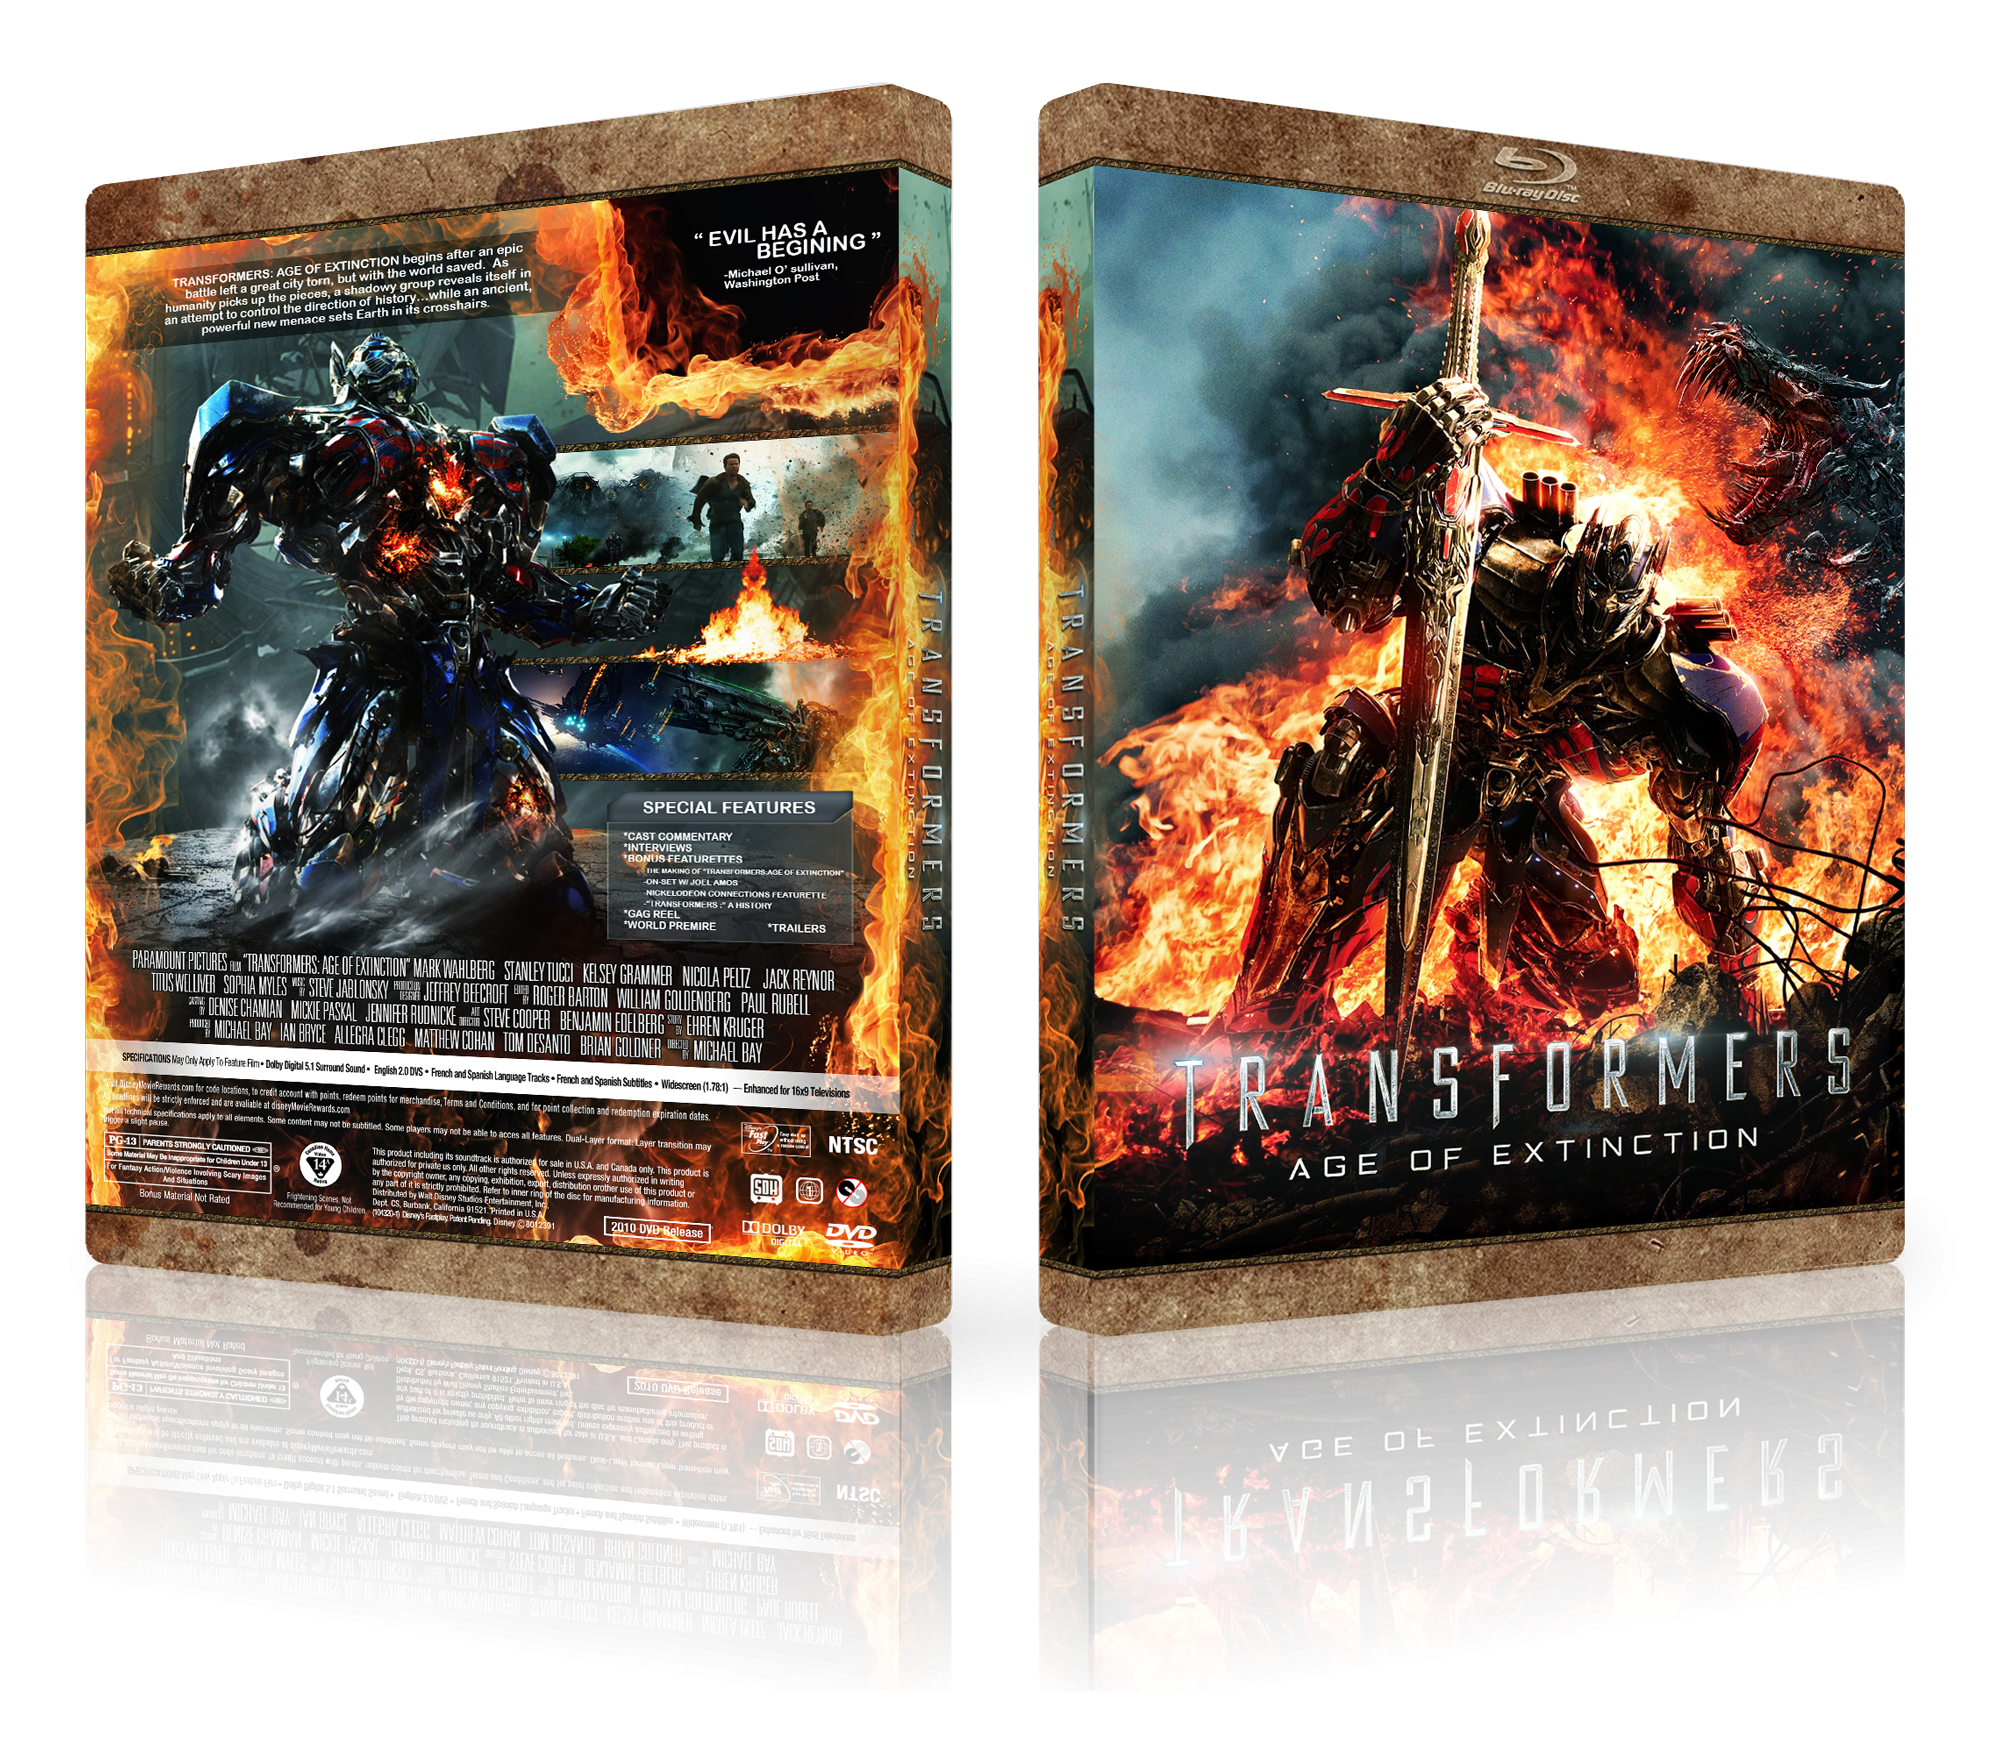 Transformers Age of Extinction box cover